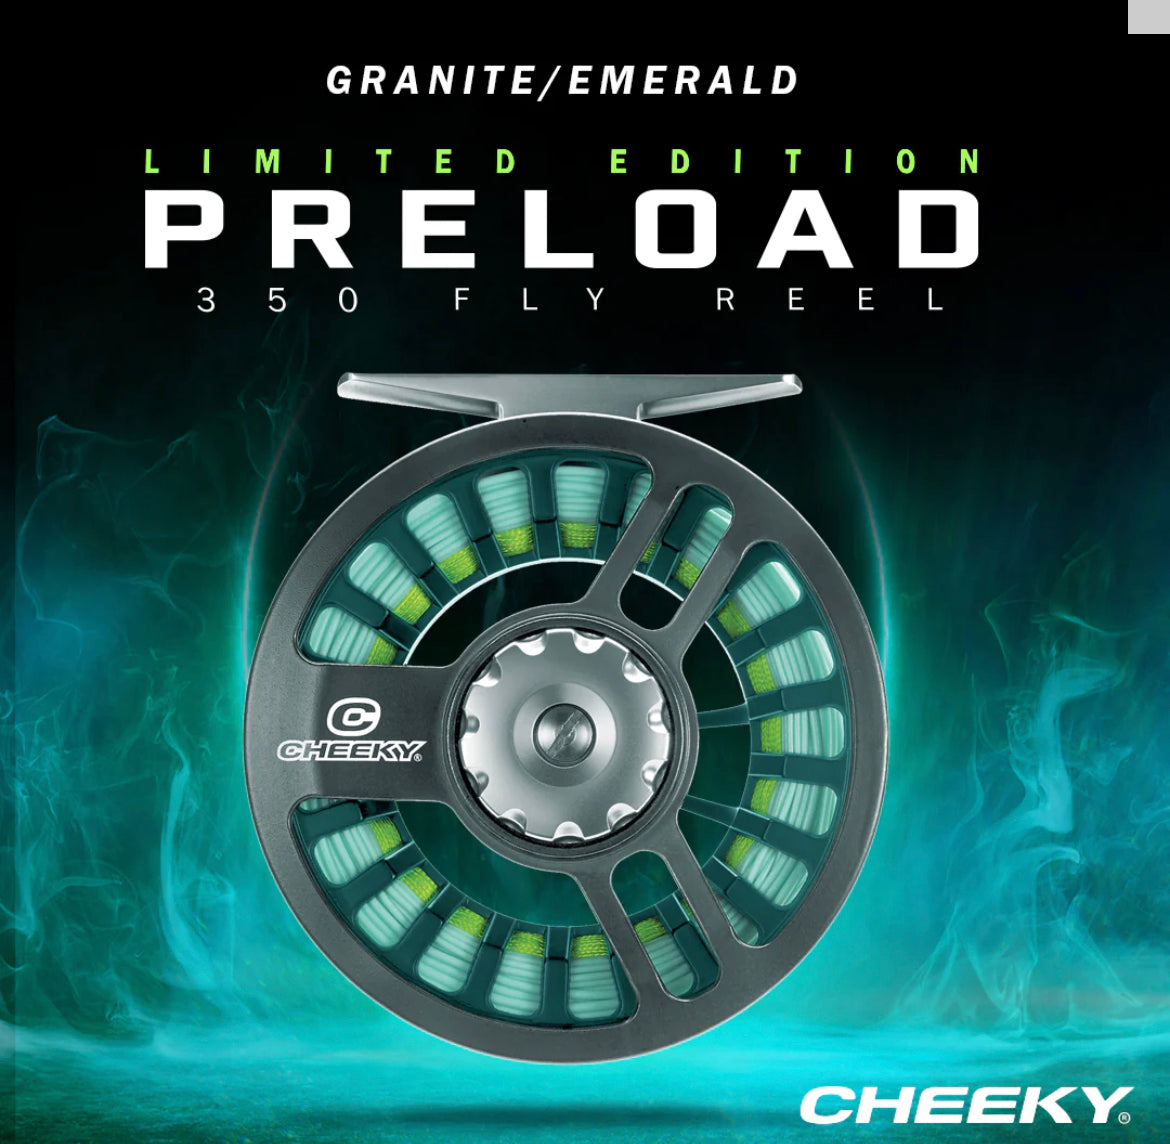 Cheeky Limited Edition 5-6 wt Granite/Emerald prespool reel – The Canyon  Fly Shop